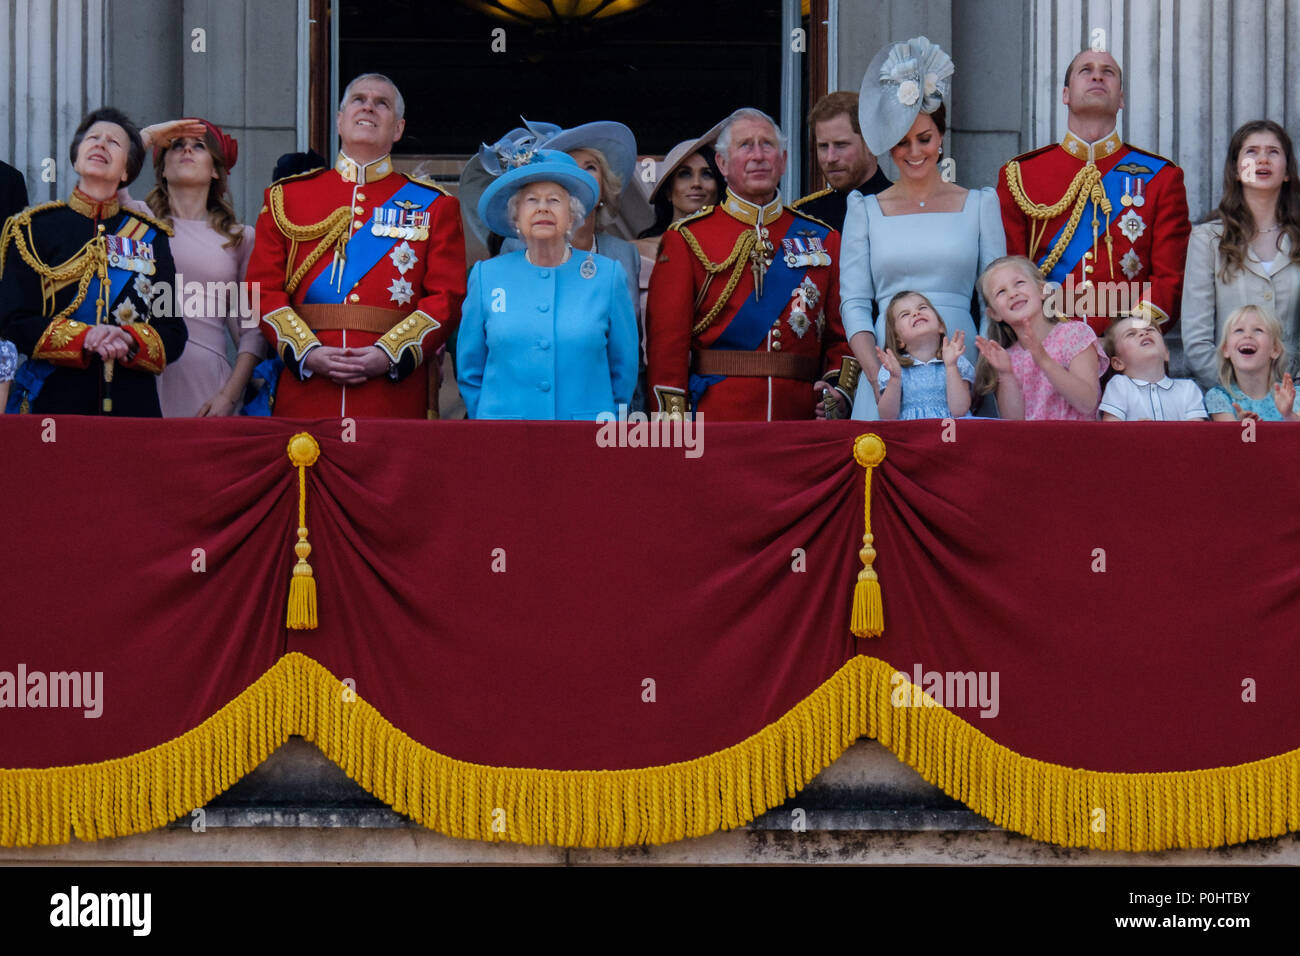 London, UK, 9 June 2018. The Royal Family gather on the palace balcony  at Trooping the Colour and Queens Birthday Parade on Saturday 9 June 2018 in Buckingham Palace , London. Pictured: Anne, The Princess Royal, Prince Andrew, The Duke of York, HRH Queen Elizabeth II, Prince Charles, Prince of Wales, Meghan Markle, Duchess of Sussex, Prince Harry, The Duke of Sussex, Kate, Duchess of Cambridge, Prince William, Duke of Cambridge, Princess Charlotte of Cambridge , Prince George of Cambridge. Picture by Julie Edwards. Credit: Julie Edwards/Alamy Live News Stock Photo